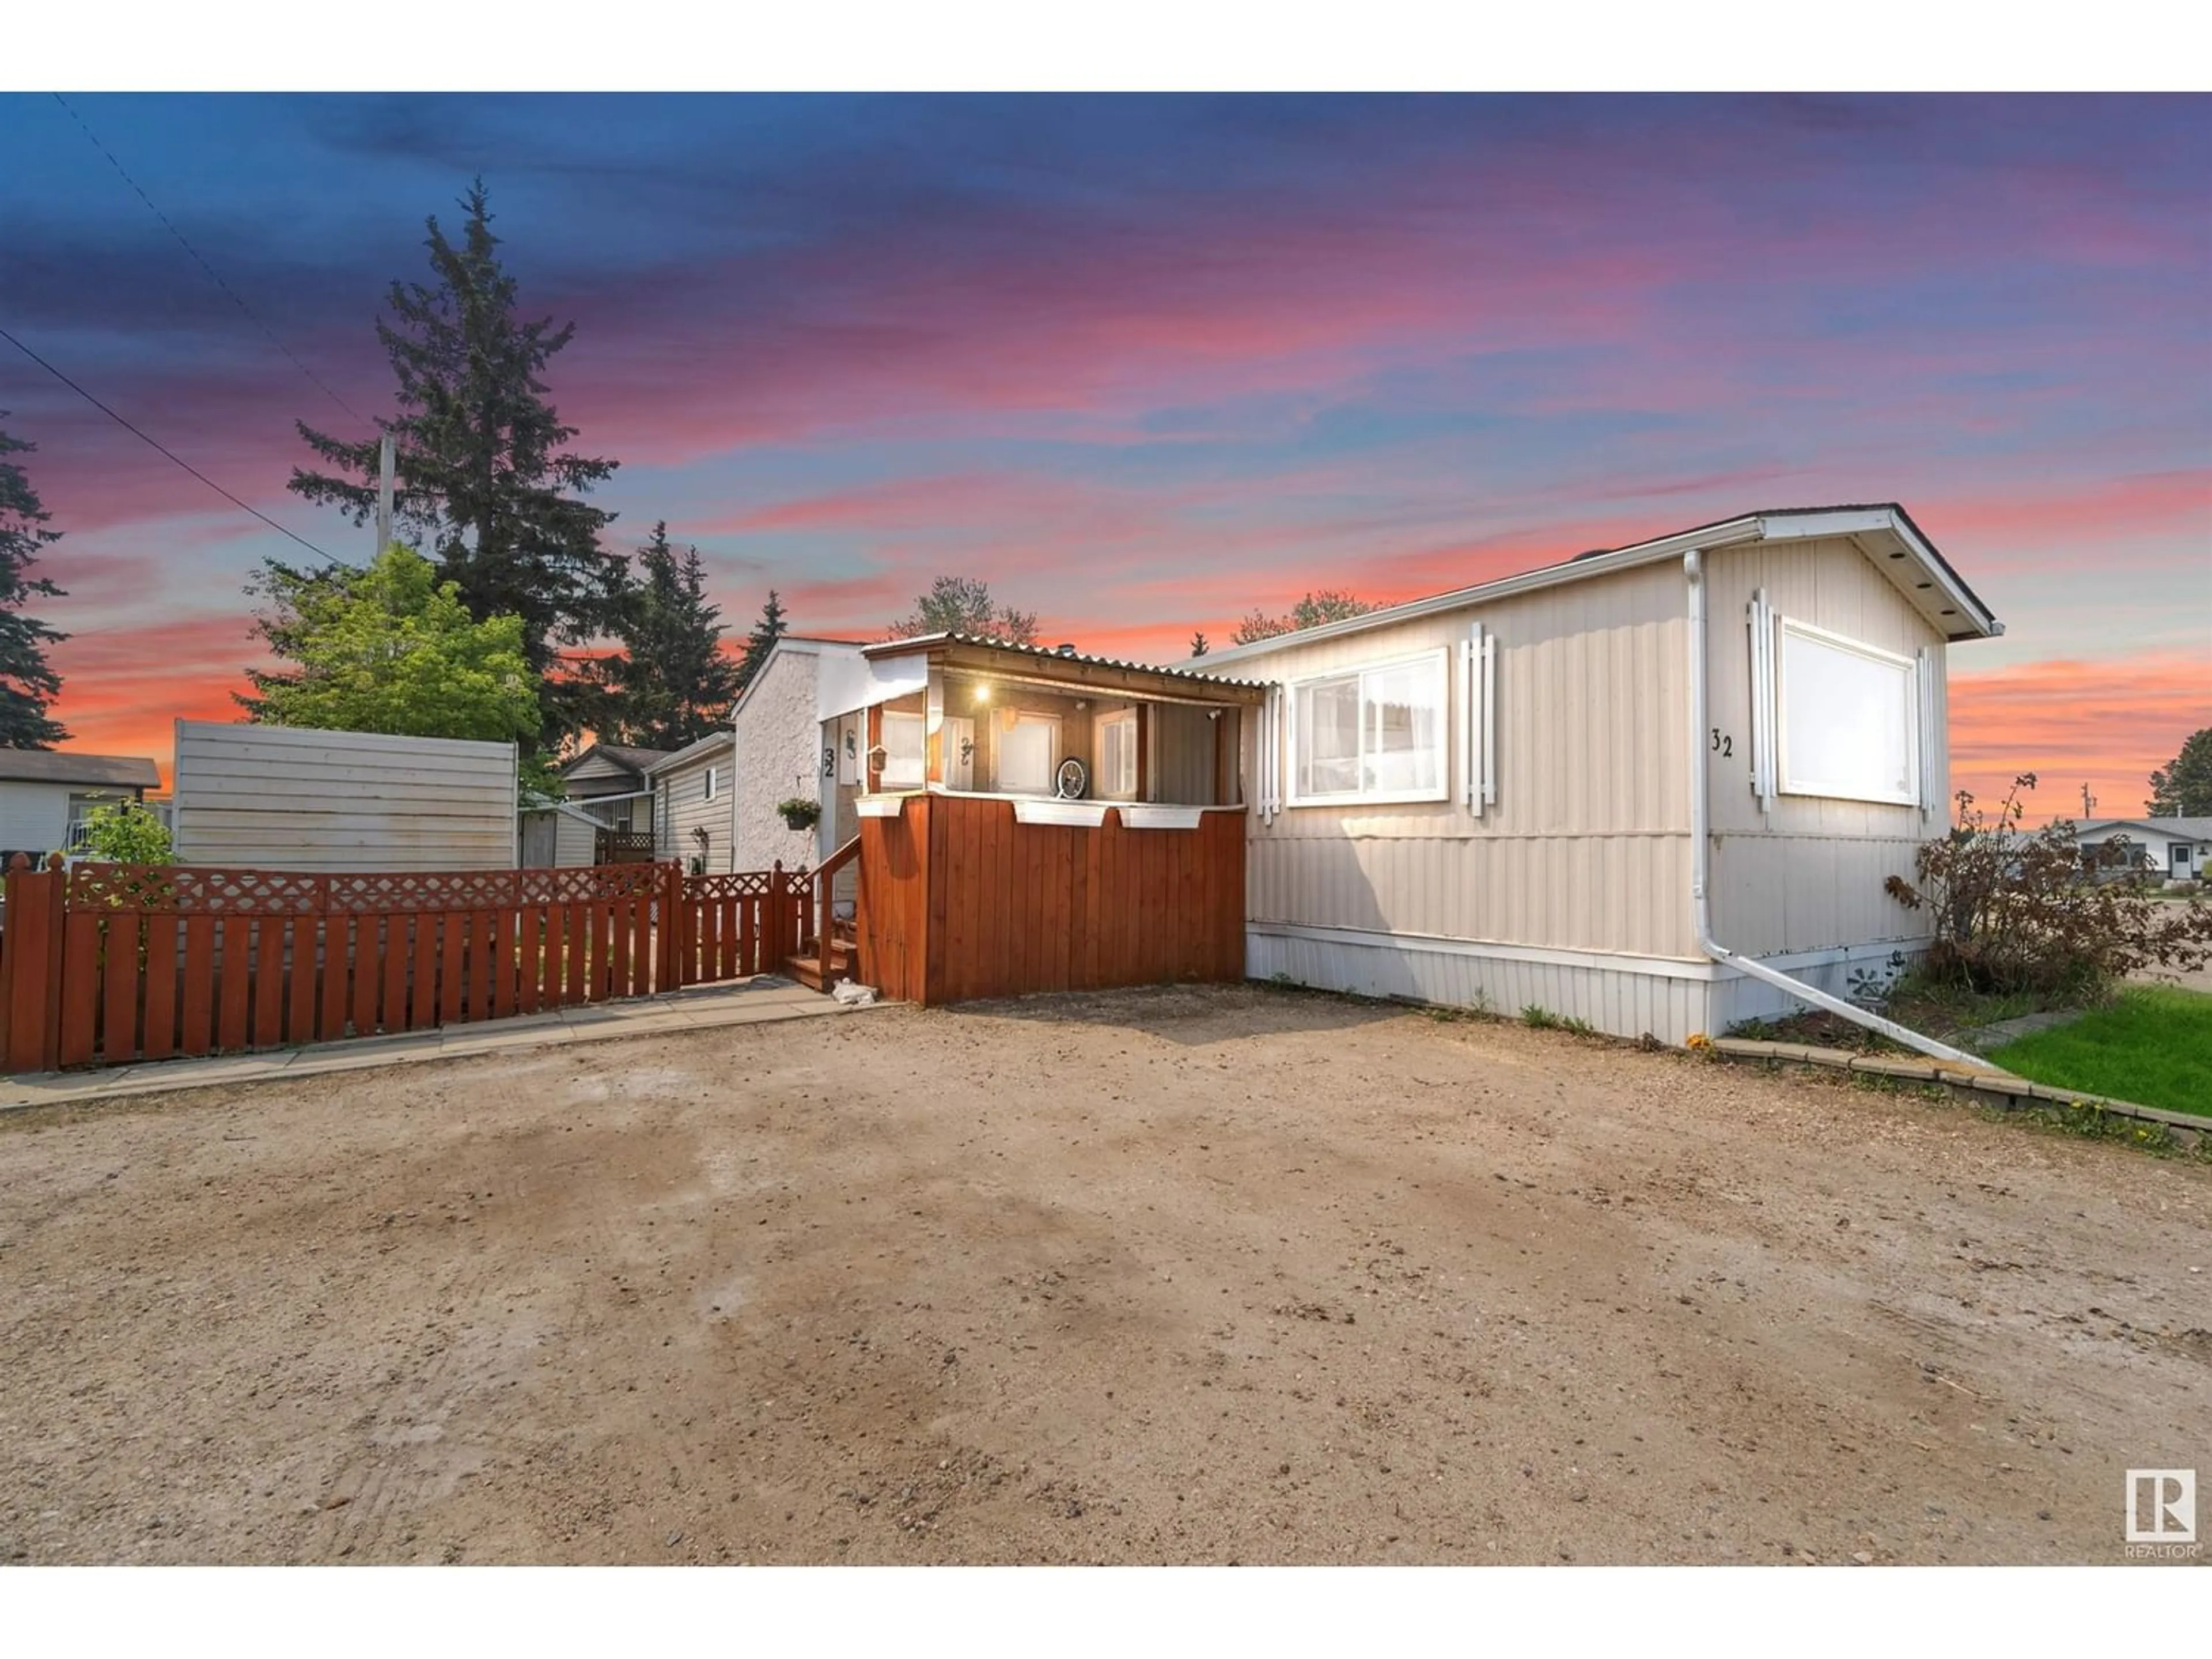 Fenced yard for #32 4839 47 ST, Gibbons Alberta T0A1N0